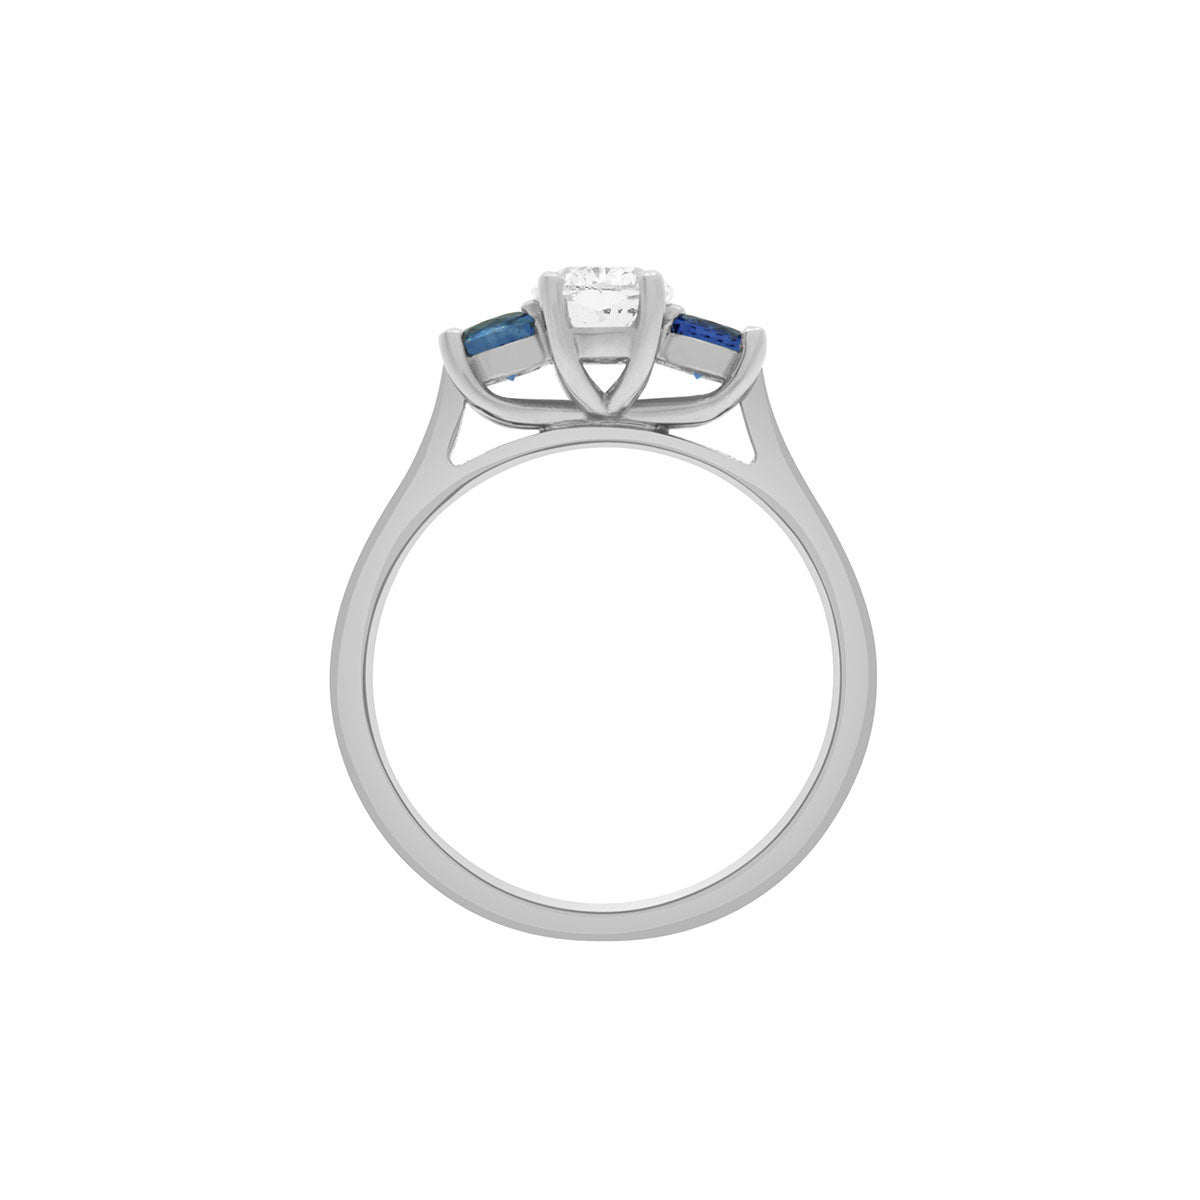 Diamond Sapphire Trilogy set in white gold metal in an upright position